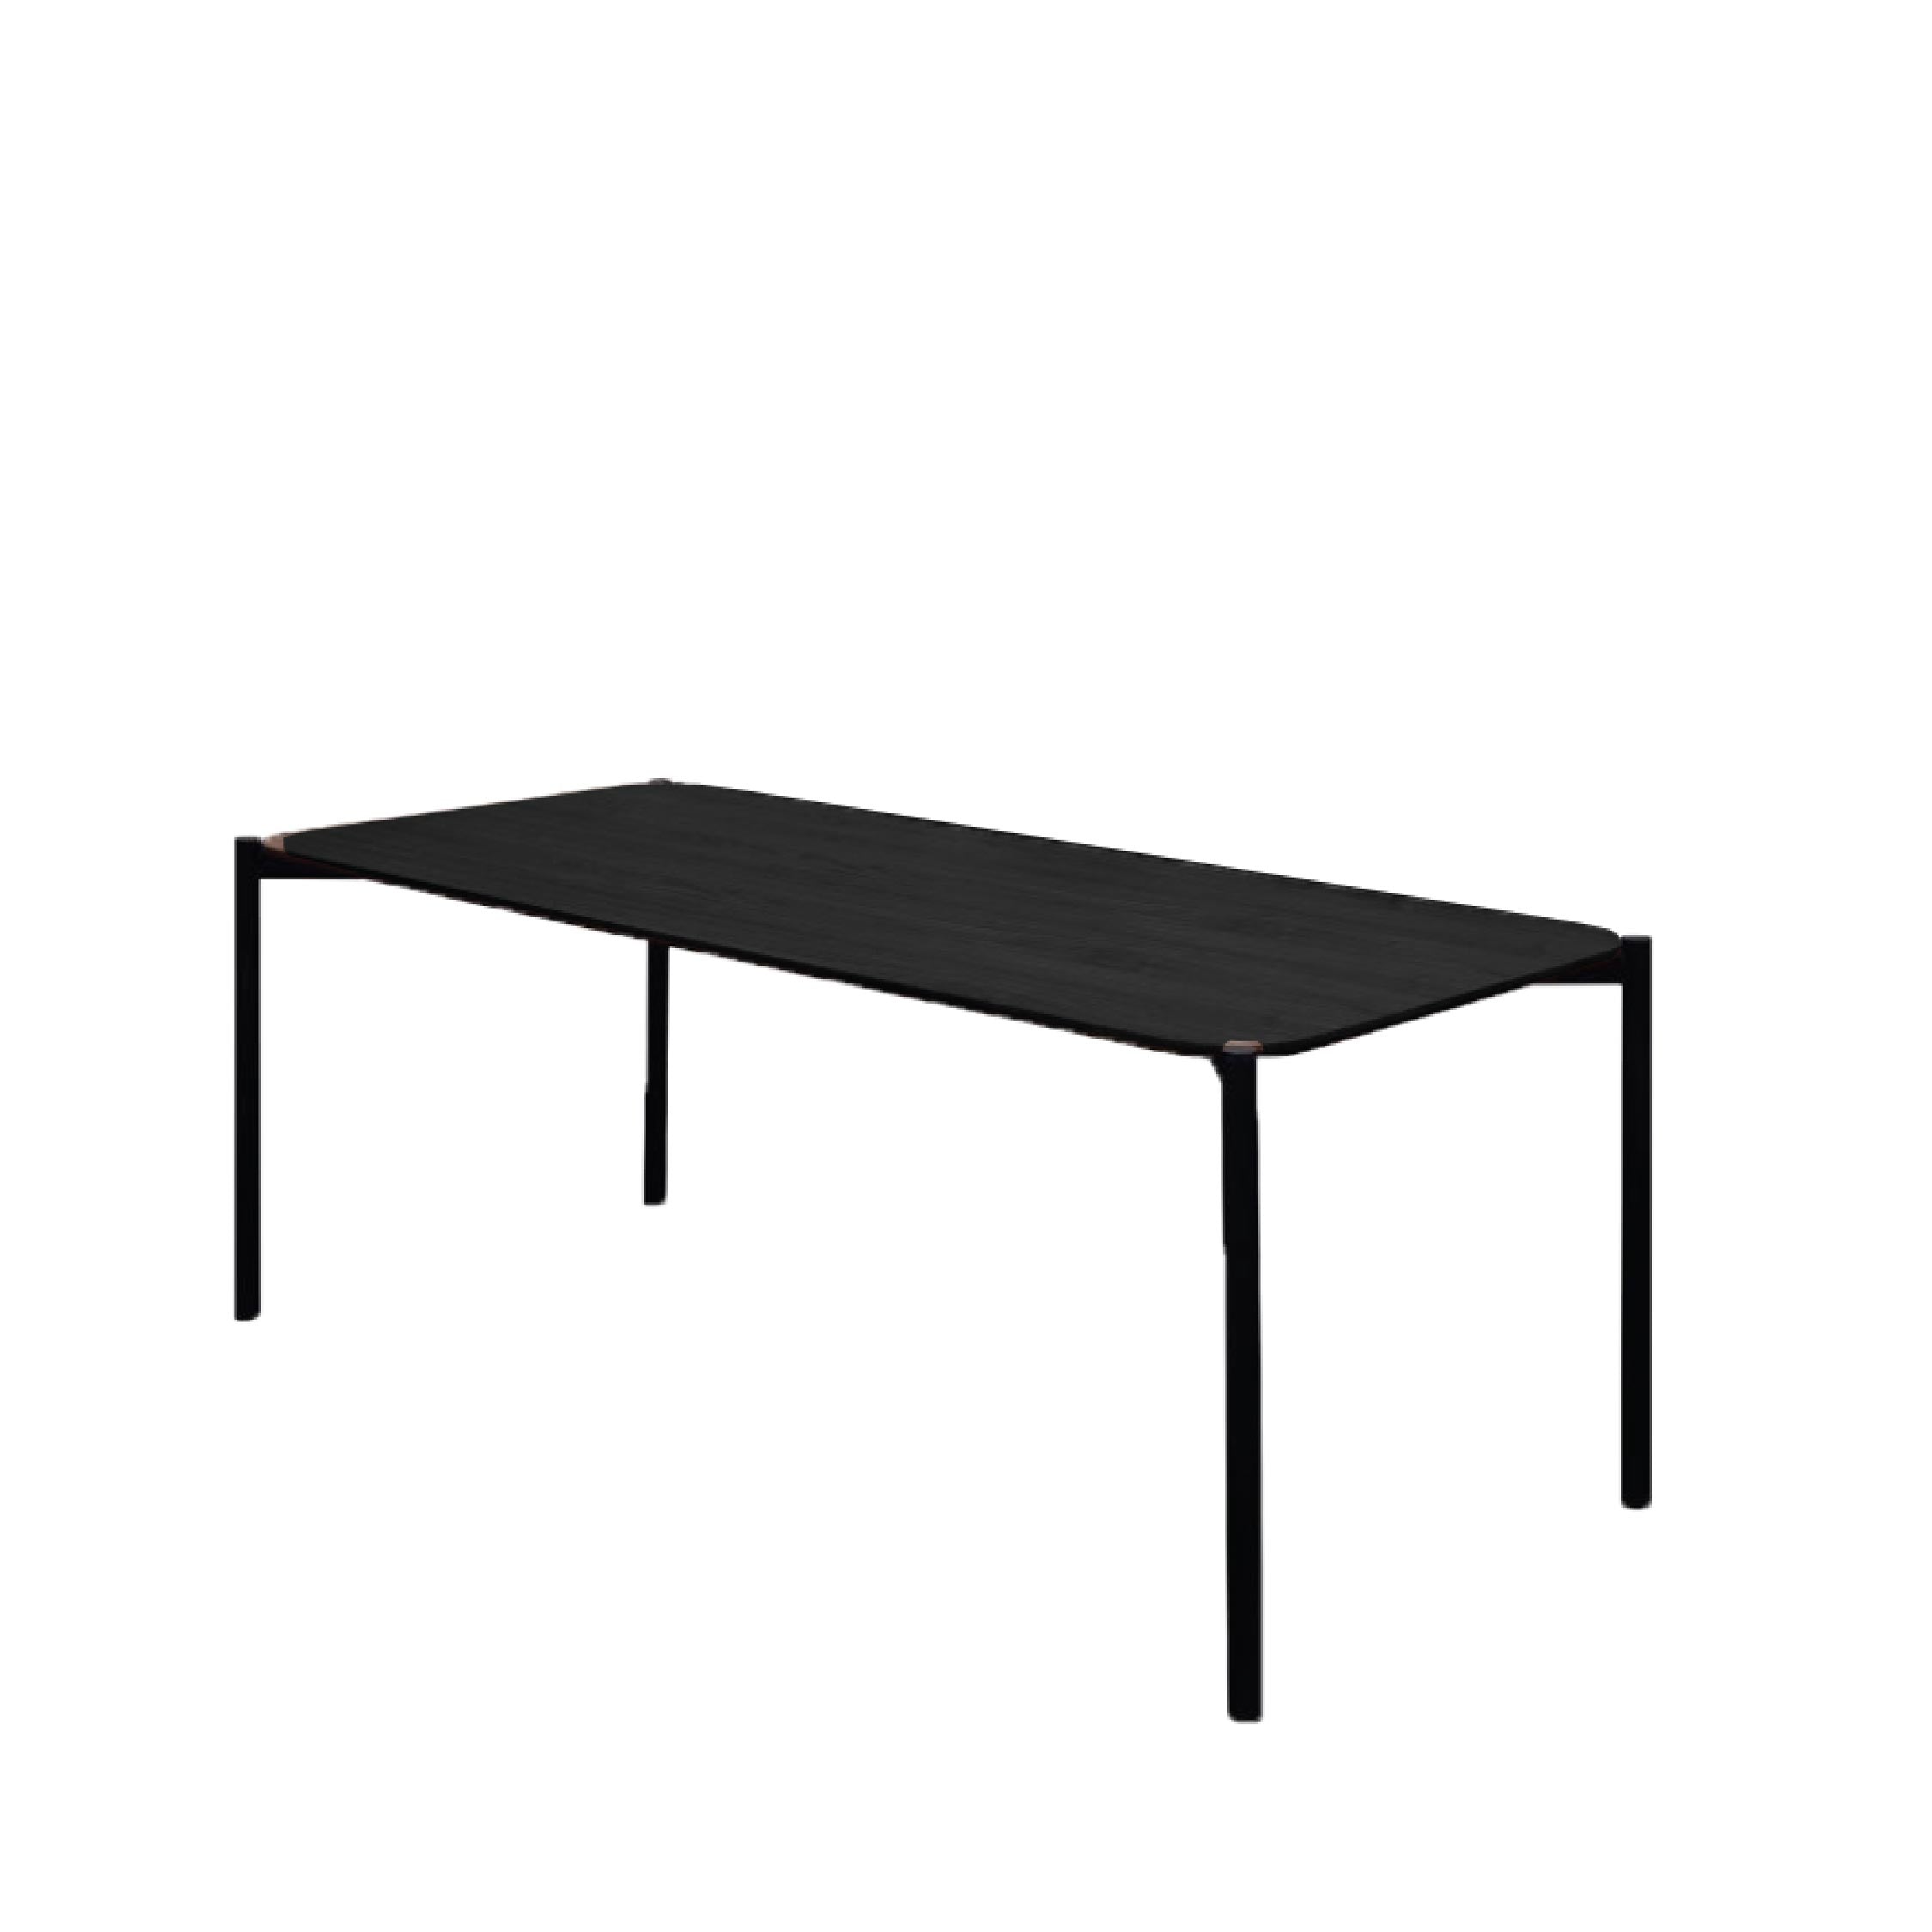 TANA Dining Table All Black W1785 mm